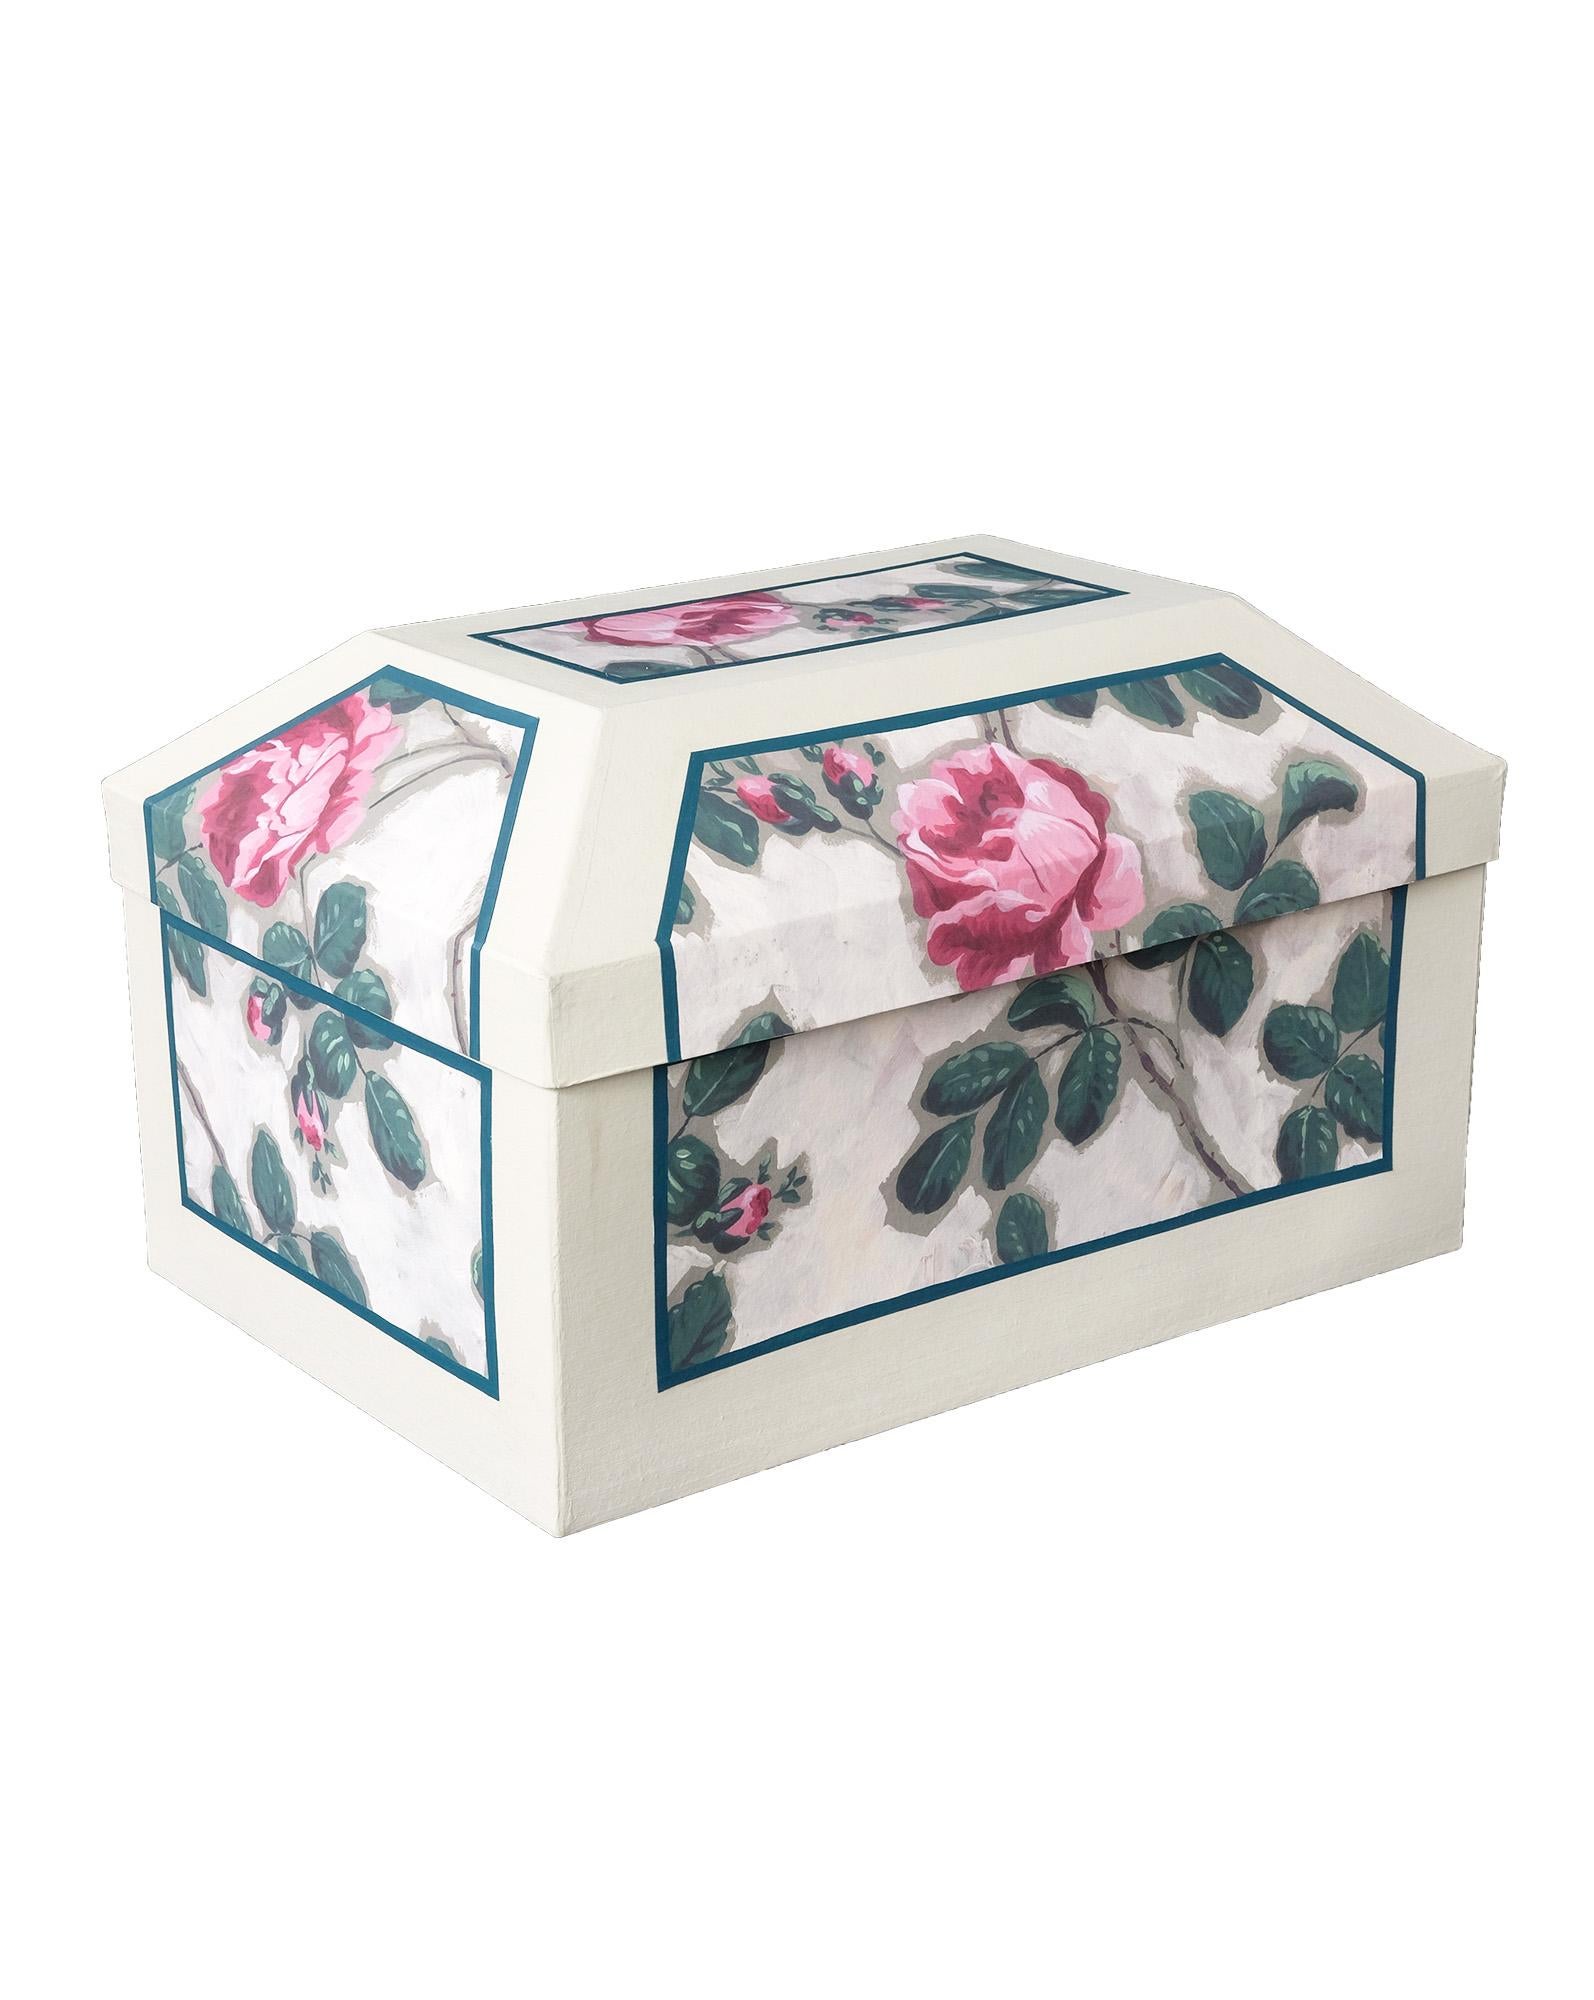 Papier-mâché storage box - decorated with hand printed paper with 